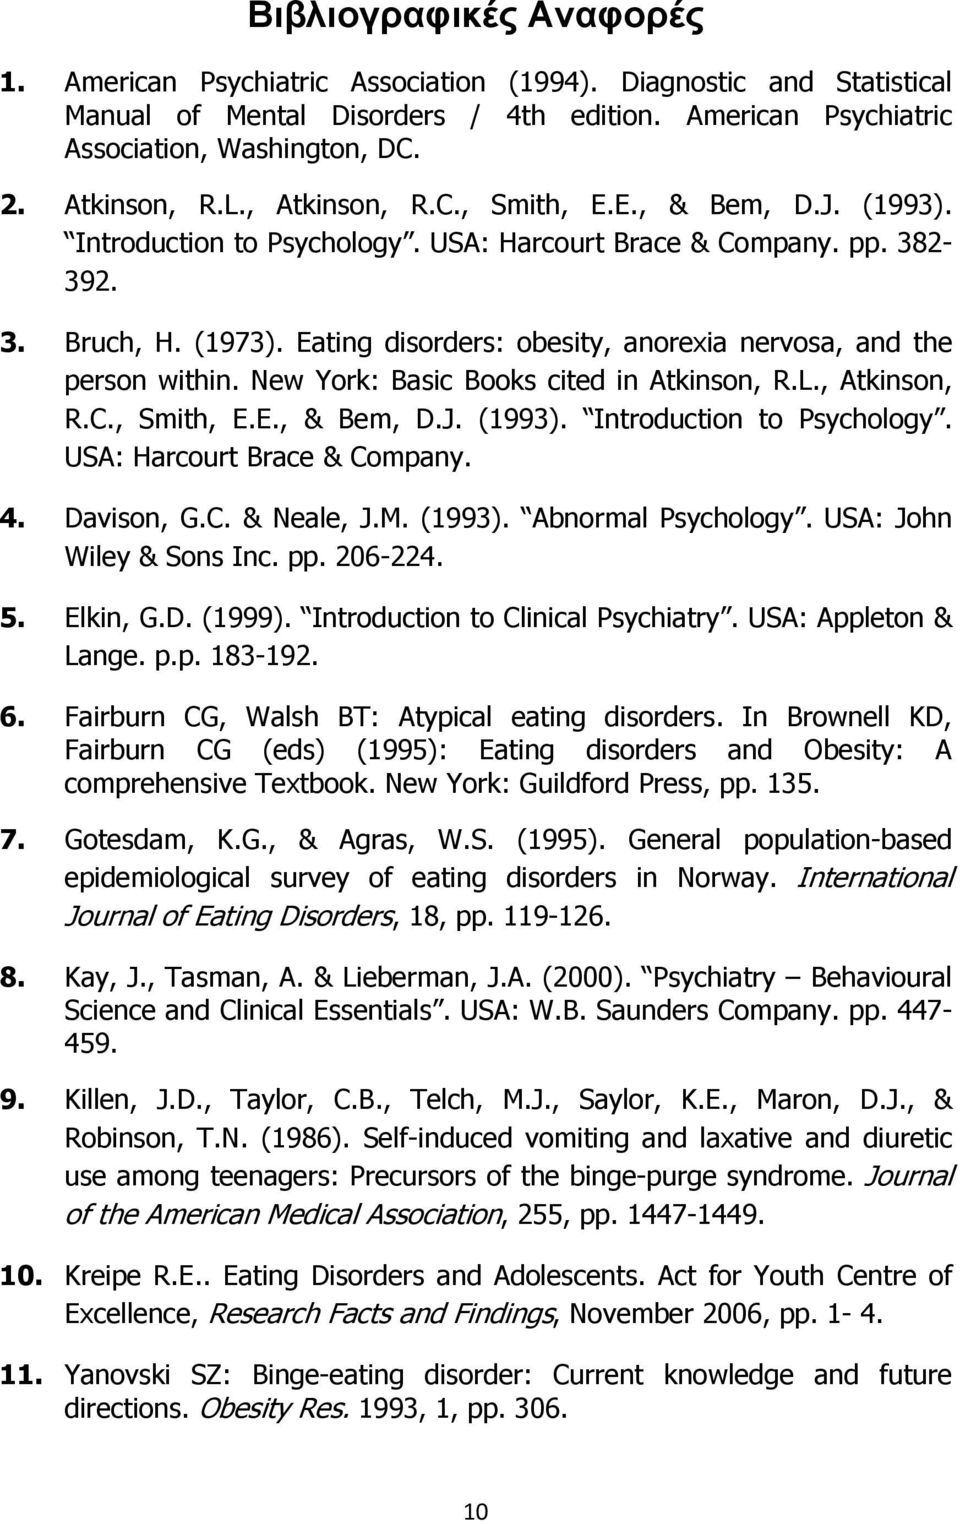 Eating disorders: obesity, anorexia nervosa, and the person within. New York: Basic Books cited in Atkinson, R.L., Atkinson, R.C., Smith, E.E., & Bem, D.J. (1993). Introduction to Psychology.